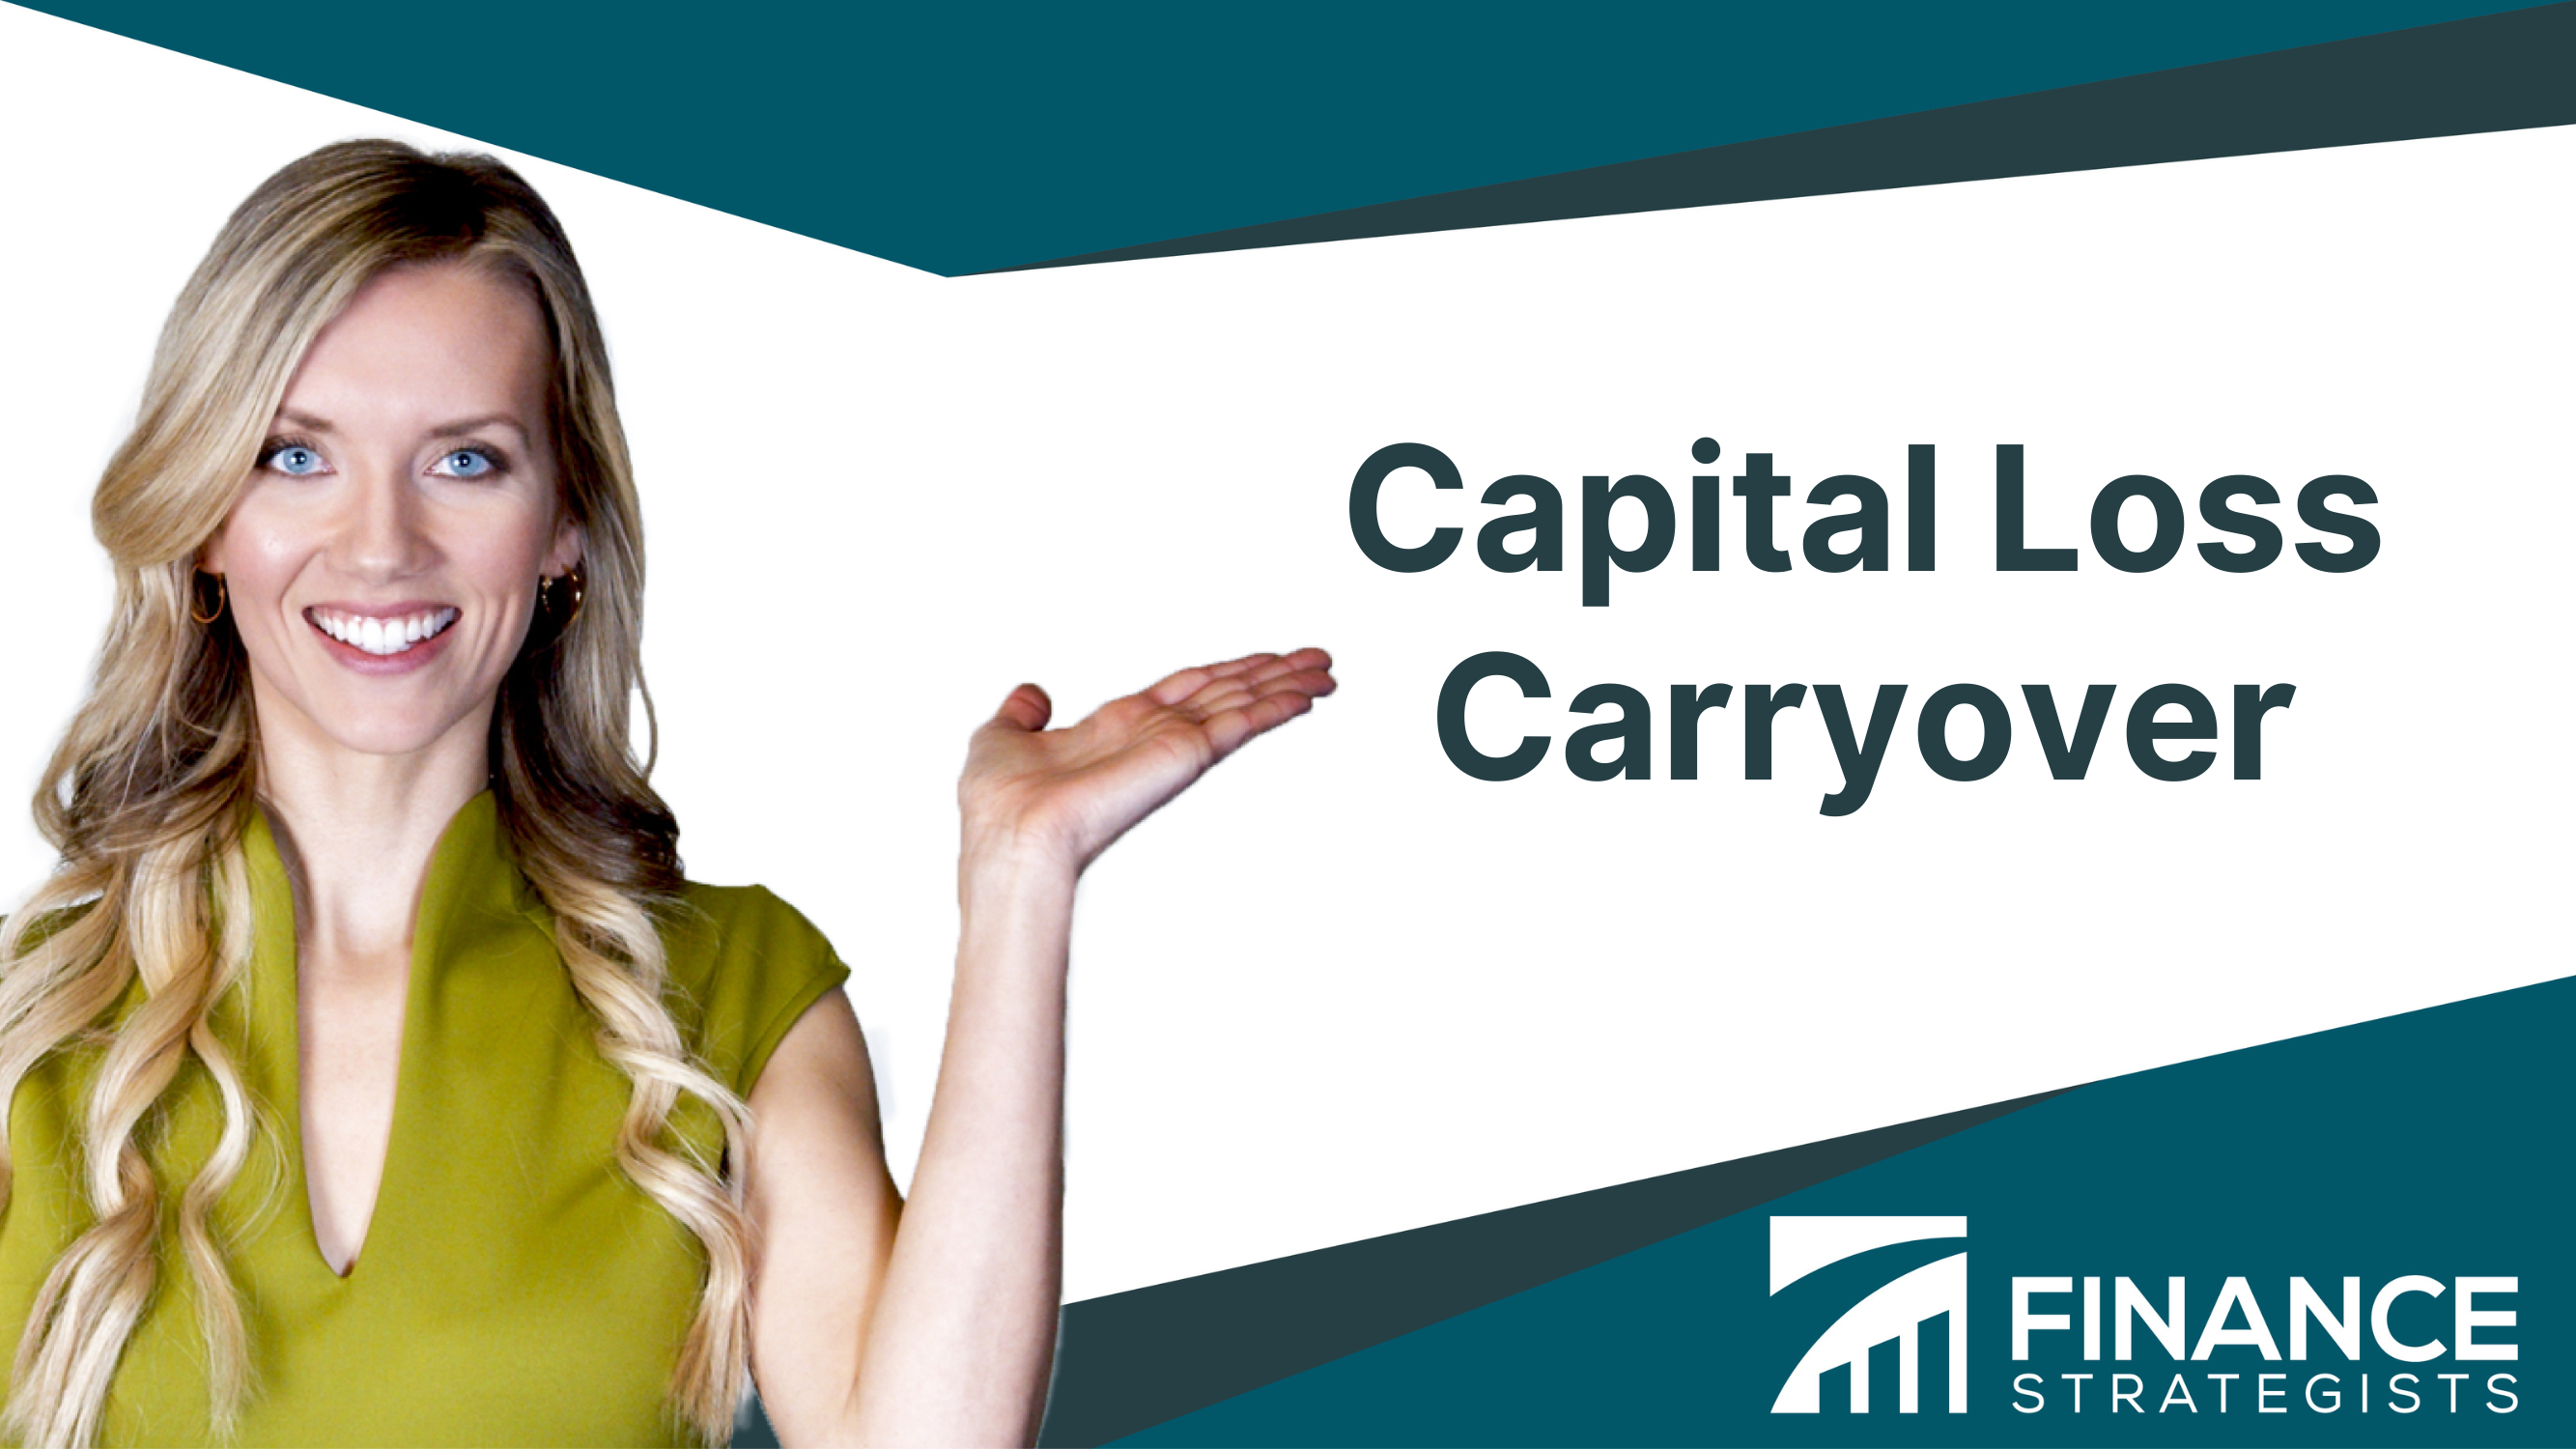 Capital Loss Carryover Definition, Conditions, Rules, Application